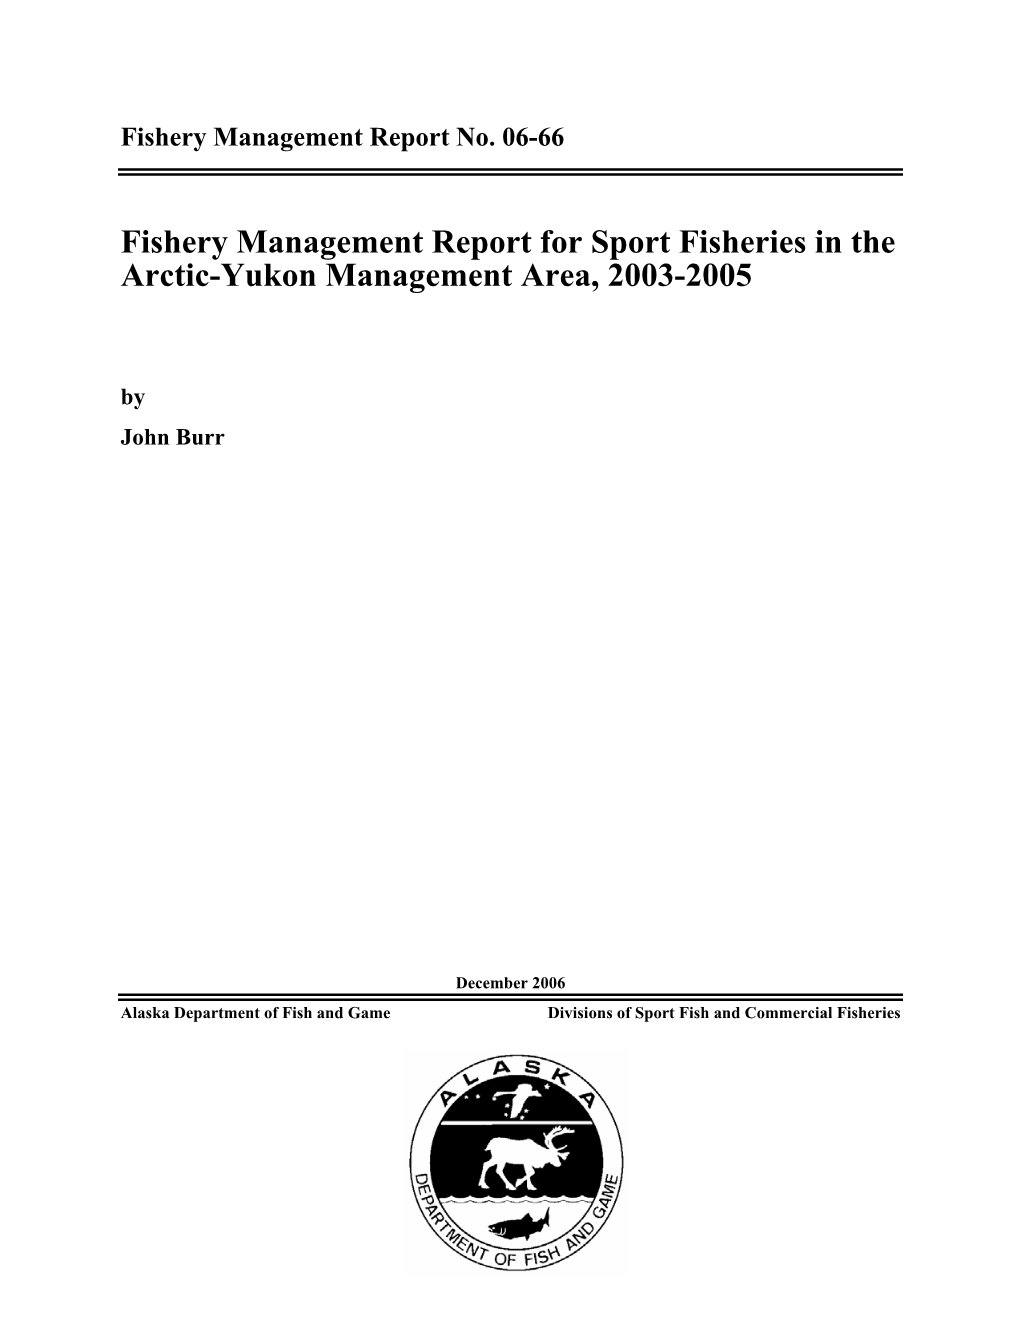 Fishery Management Report for Sport Fisheries in the Arctic-Yukon Management Area, 2003-2005